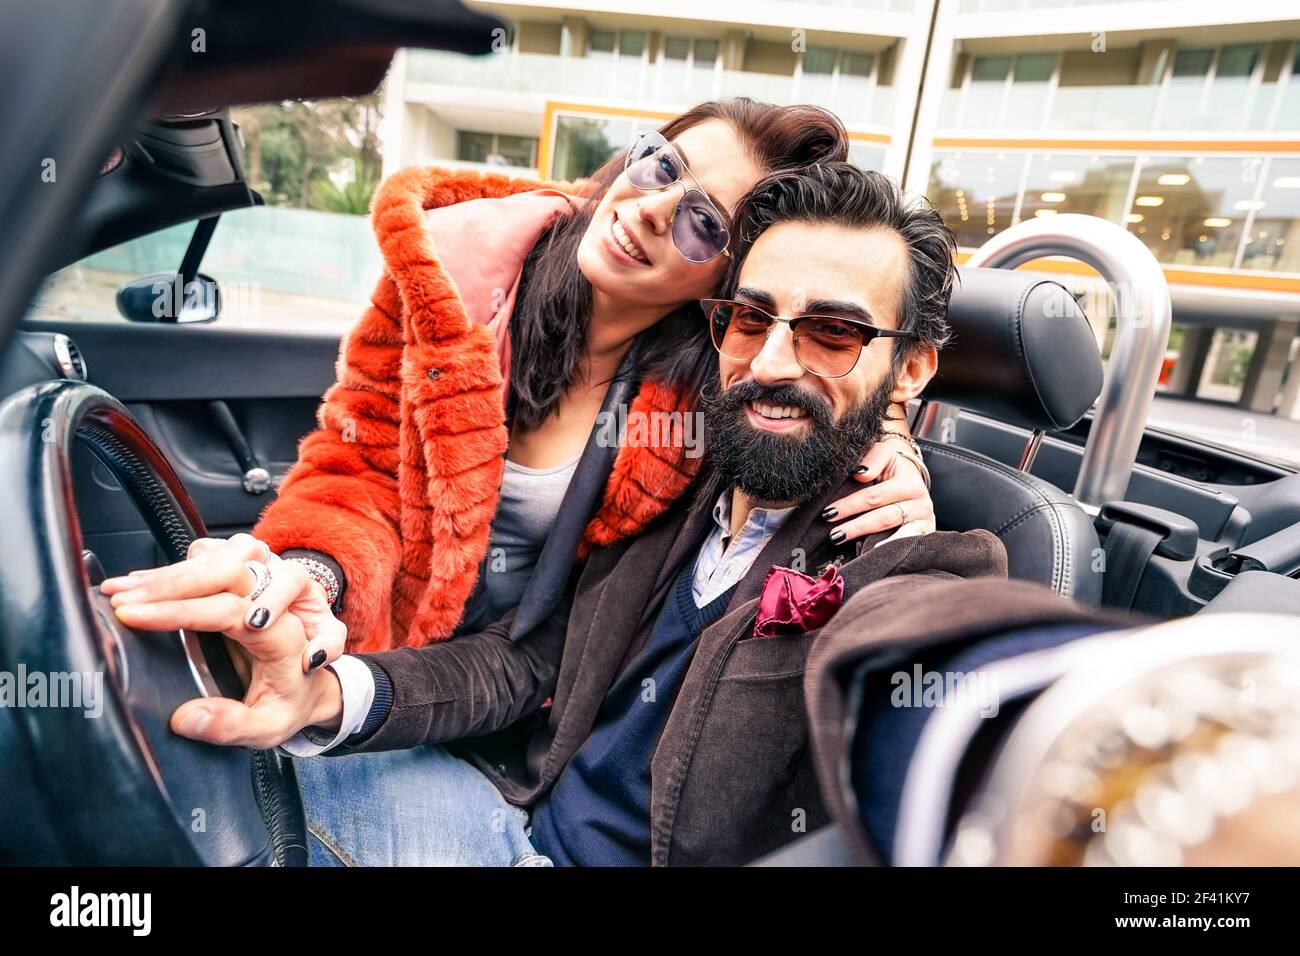 Handsome hipster boyfriend having fun with girlfriend - Happy couple taking selfie at car trip - Modern love relationship concept Stock Photo